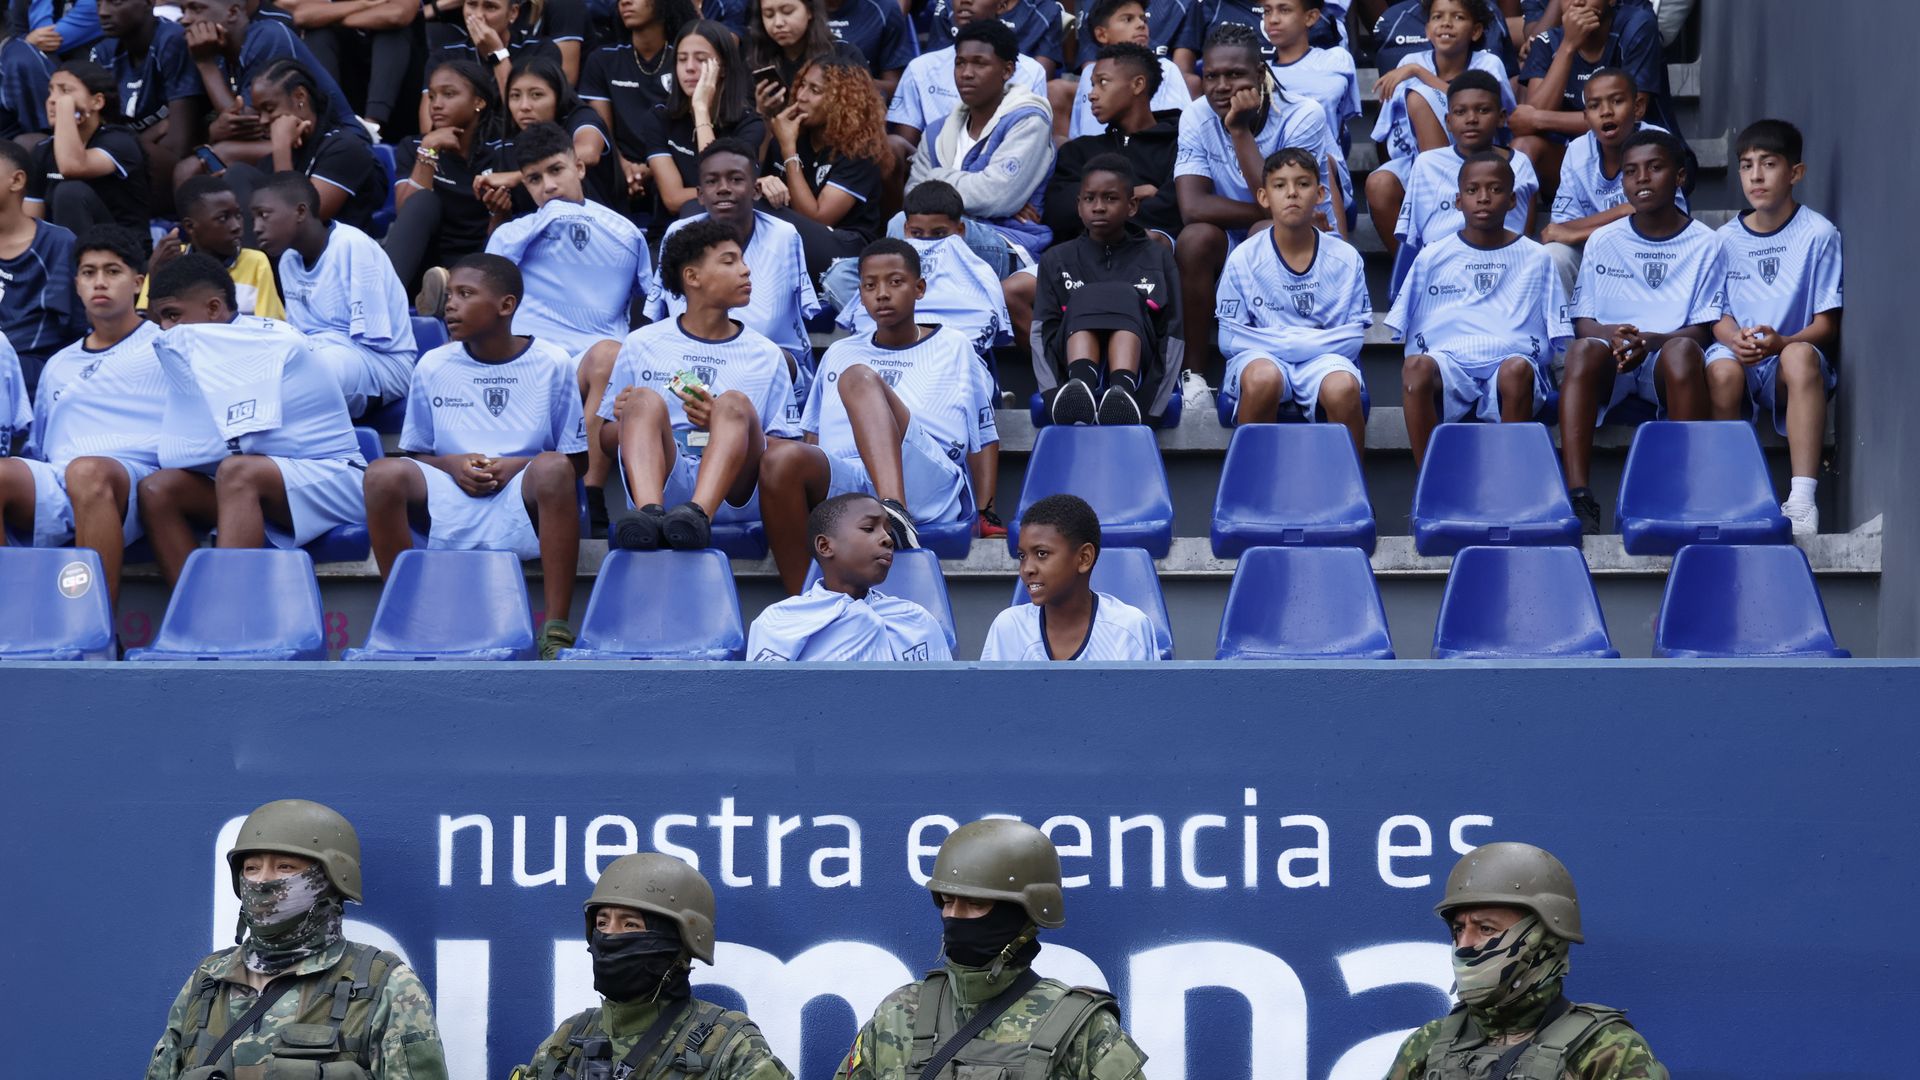 Four military officers dressed fully in fatigues stand below rows of young soccer players in blue jerseys at a futbol stadium